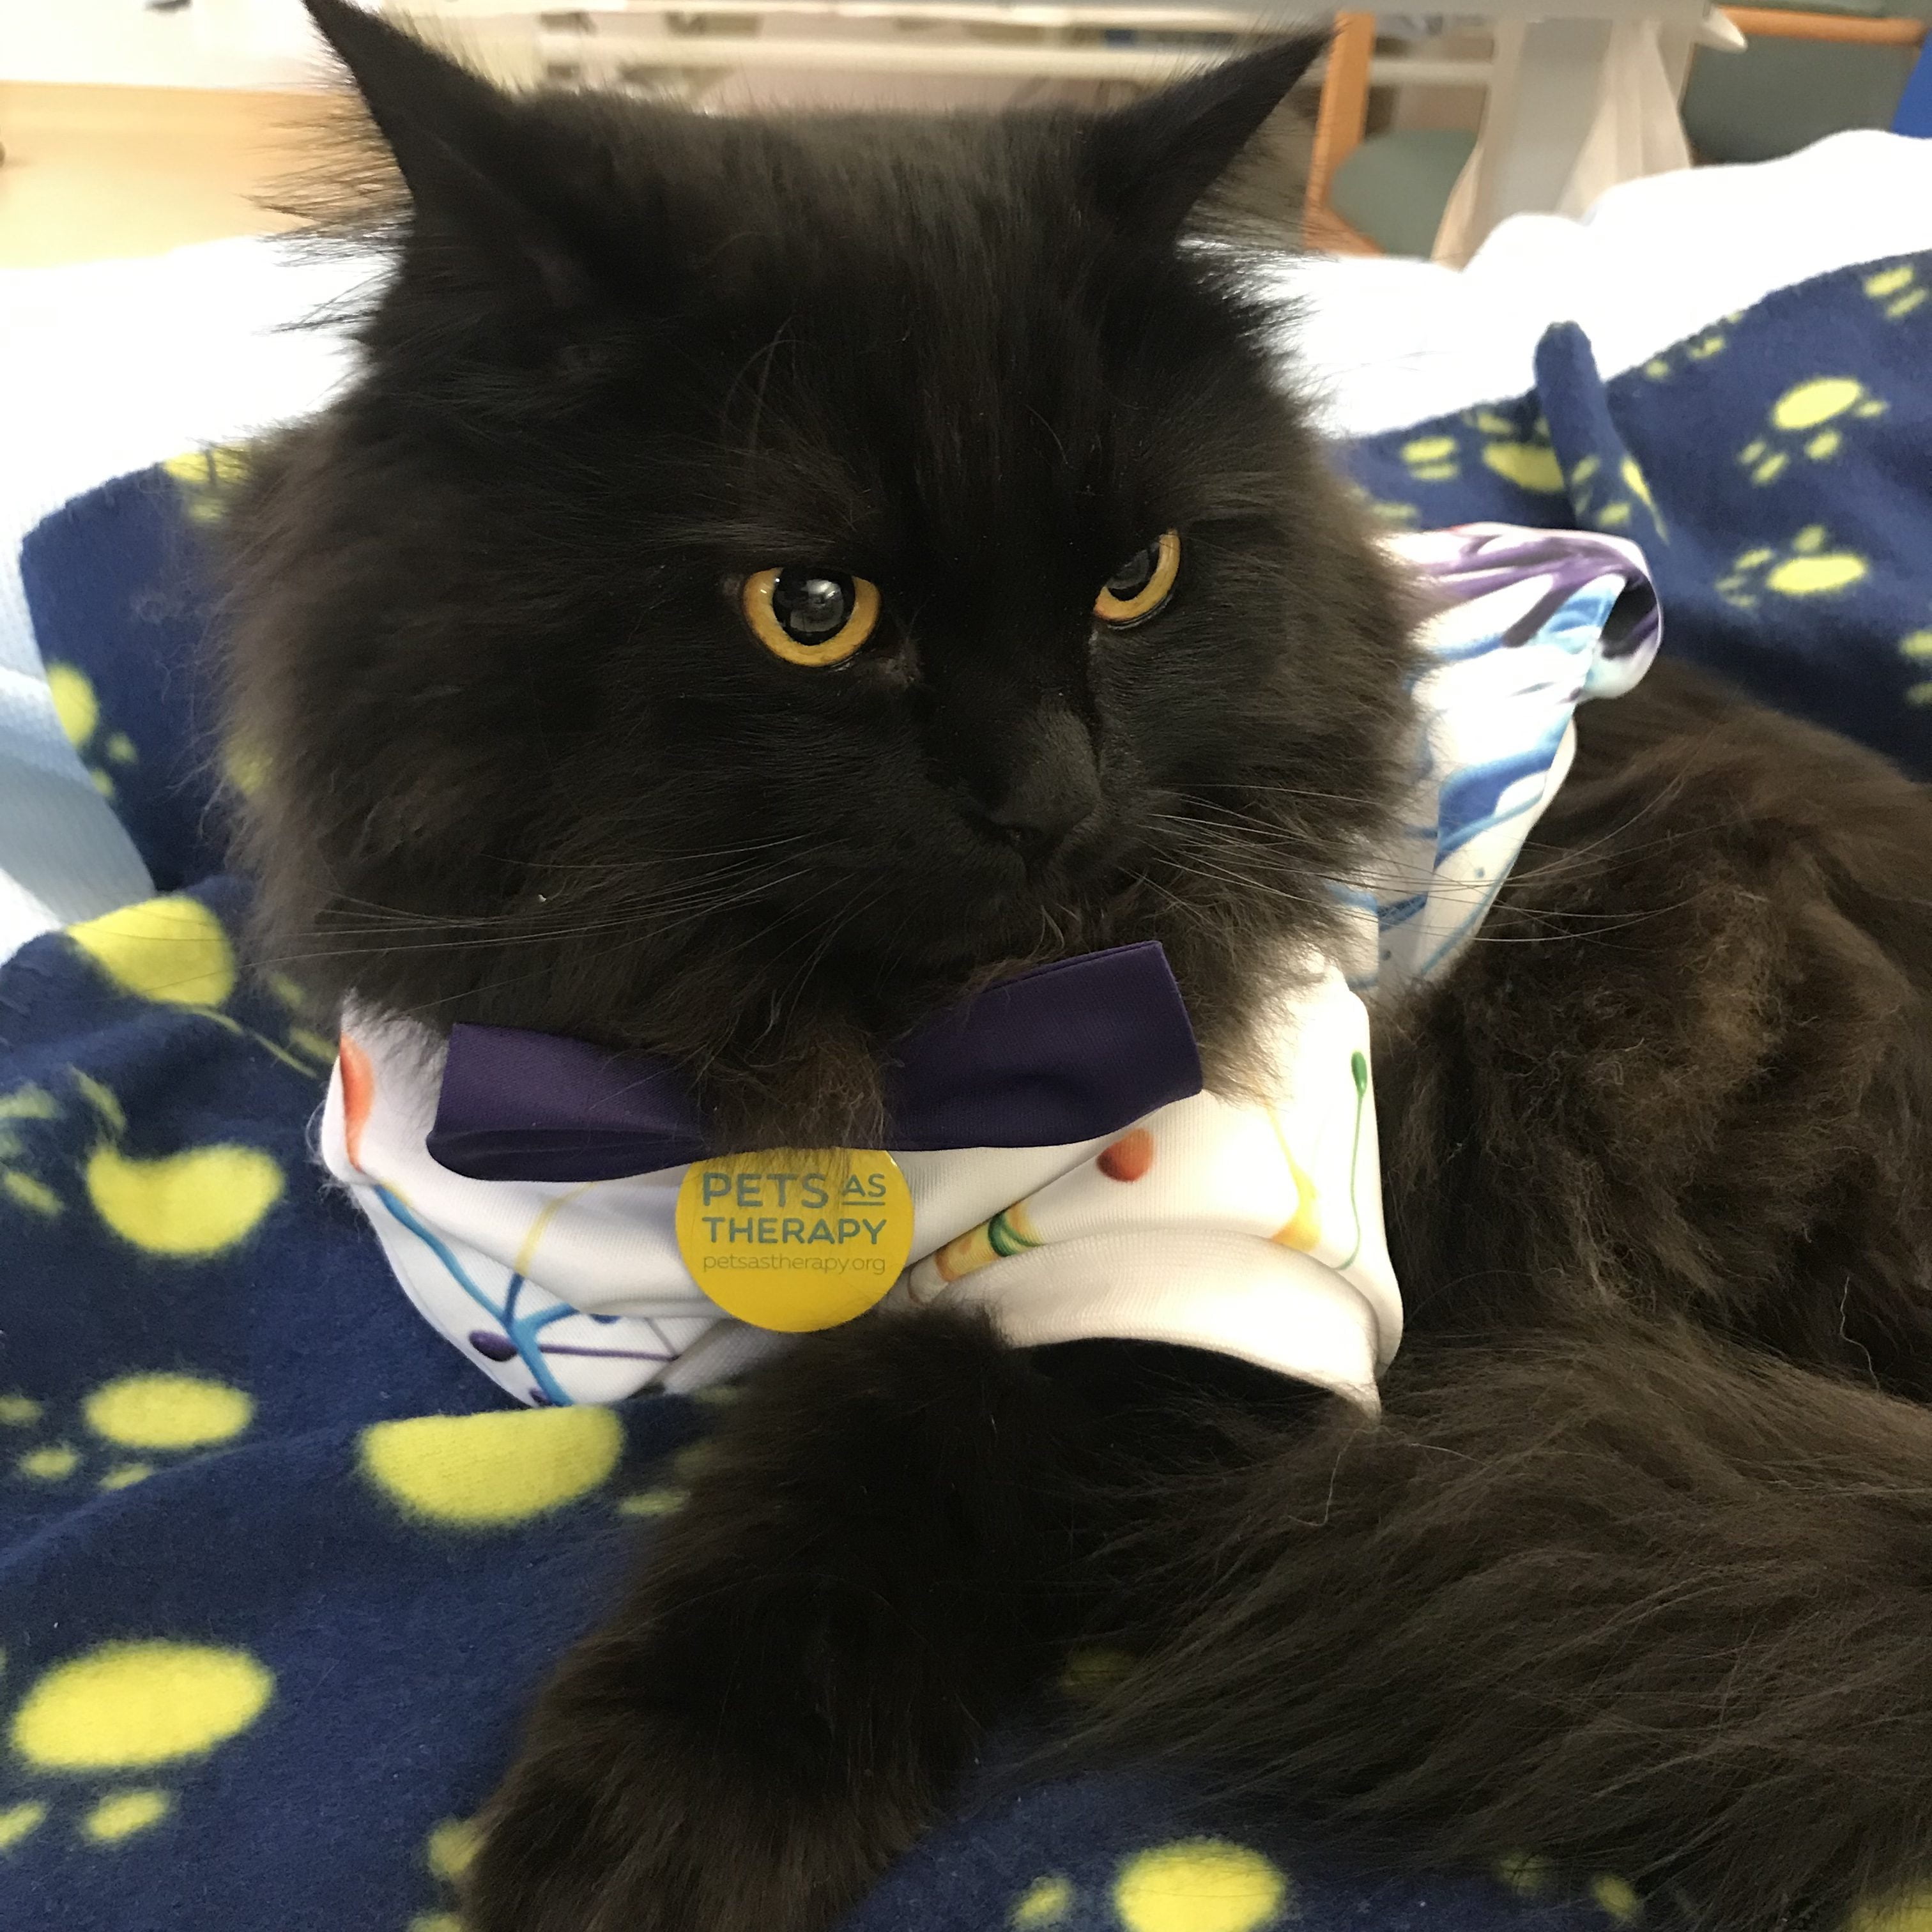 Pets as Therapy Cat London on his blanket